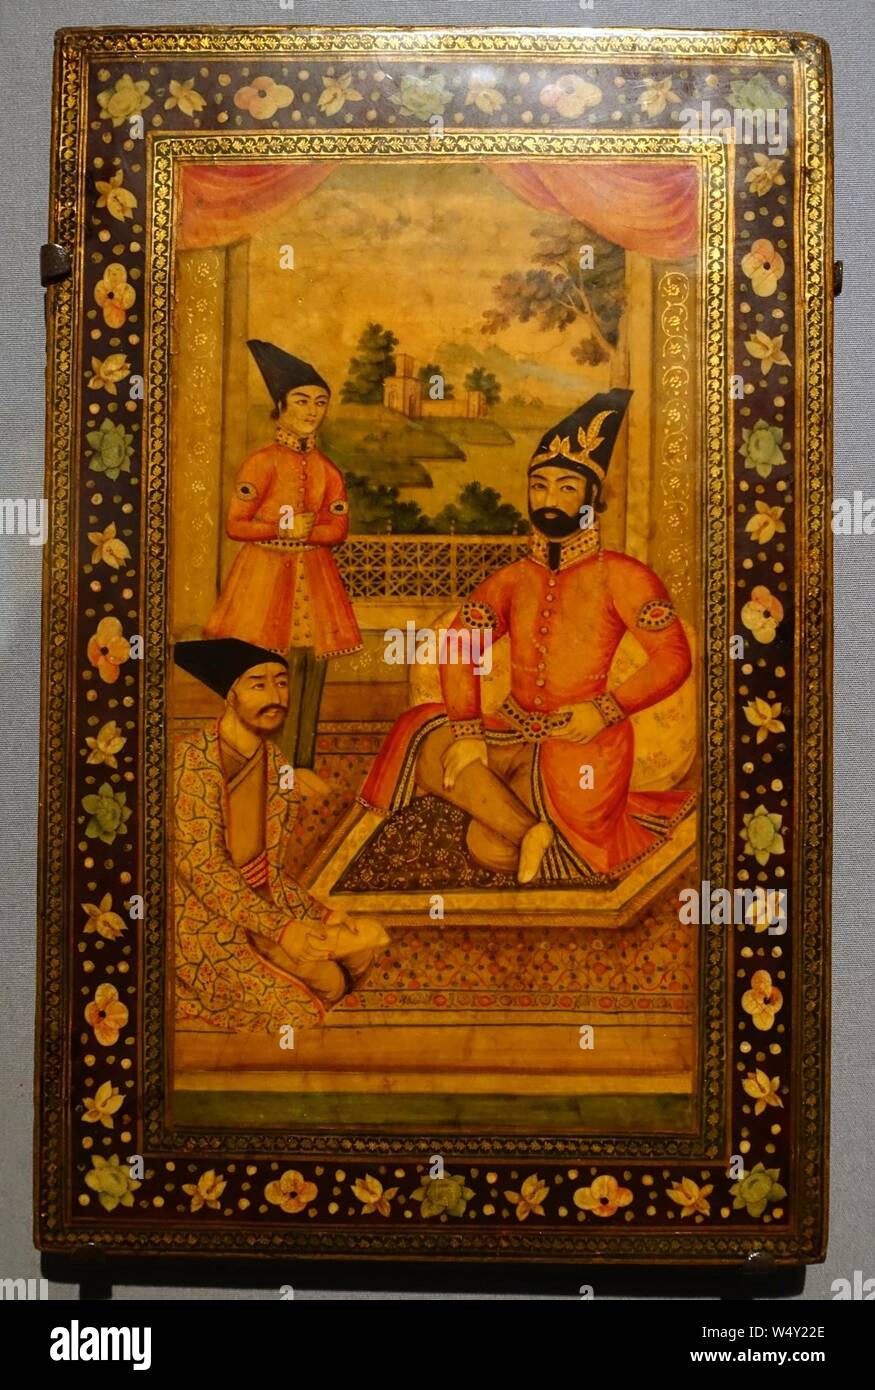 Cover of a mirror case with Muhammad Shah, Prince Nasir al-Din, and Haji Mirza Aqasi, Iran, c. 1835-1840 AD, watercolor, gold-colored pigments, and lacquer on pasteboard- Stock Photo